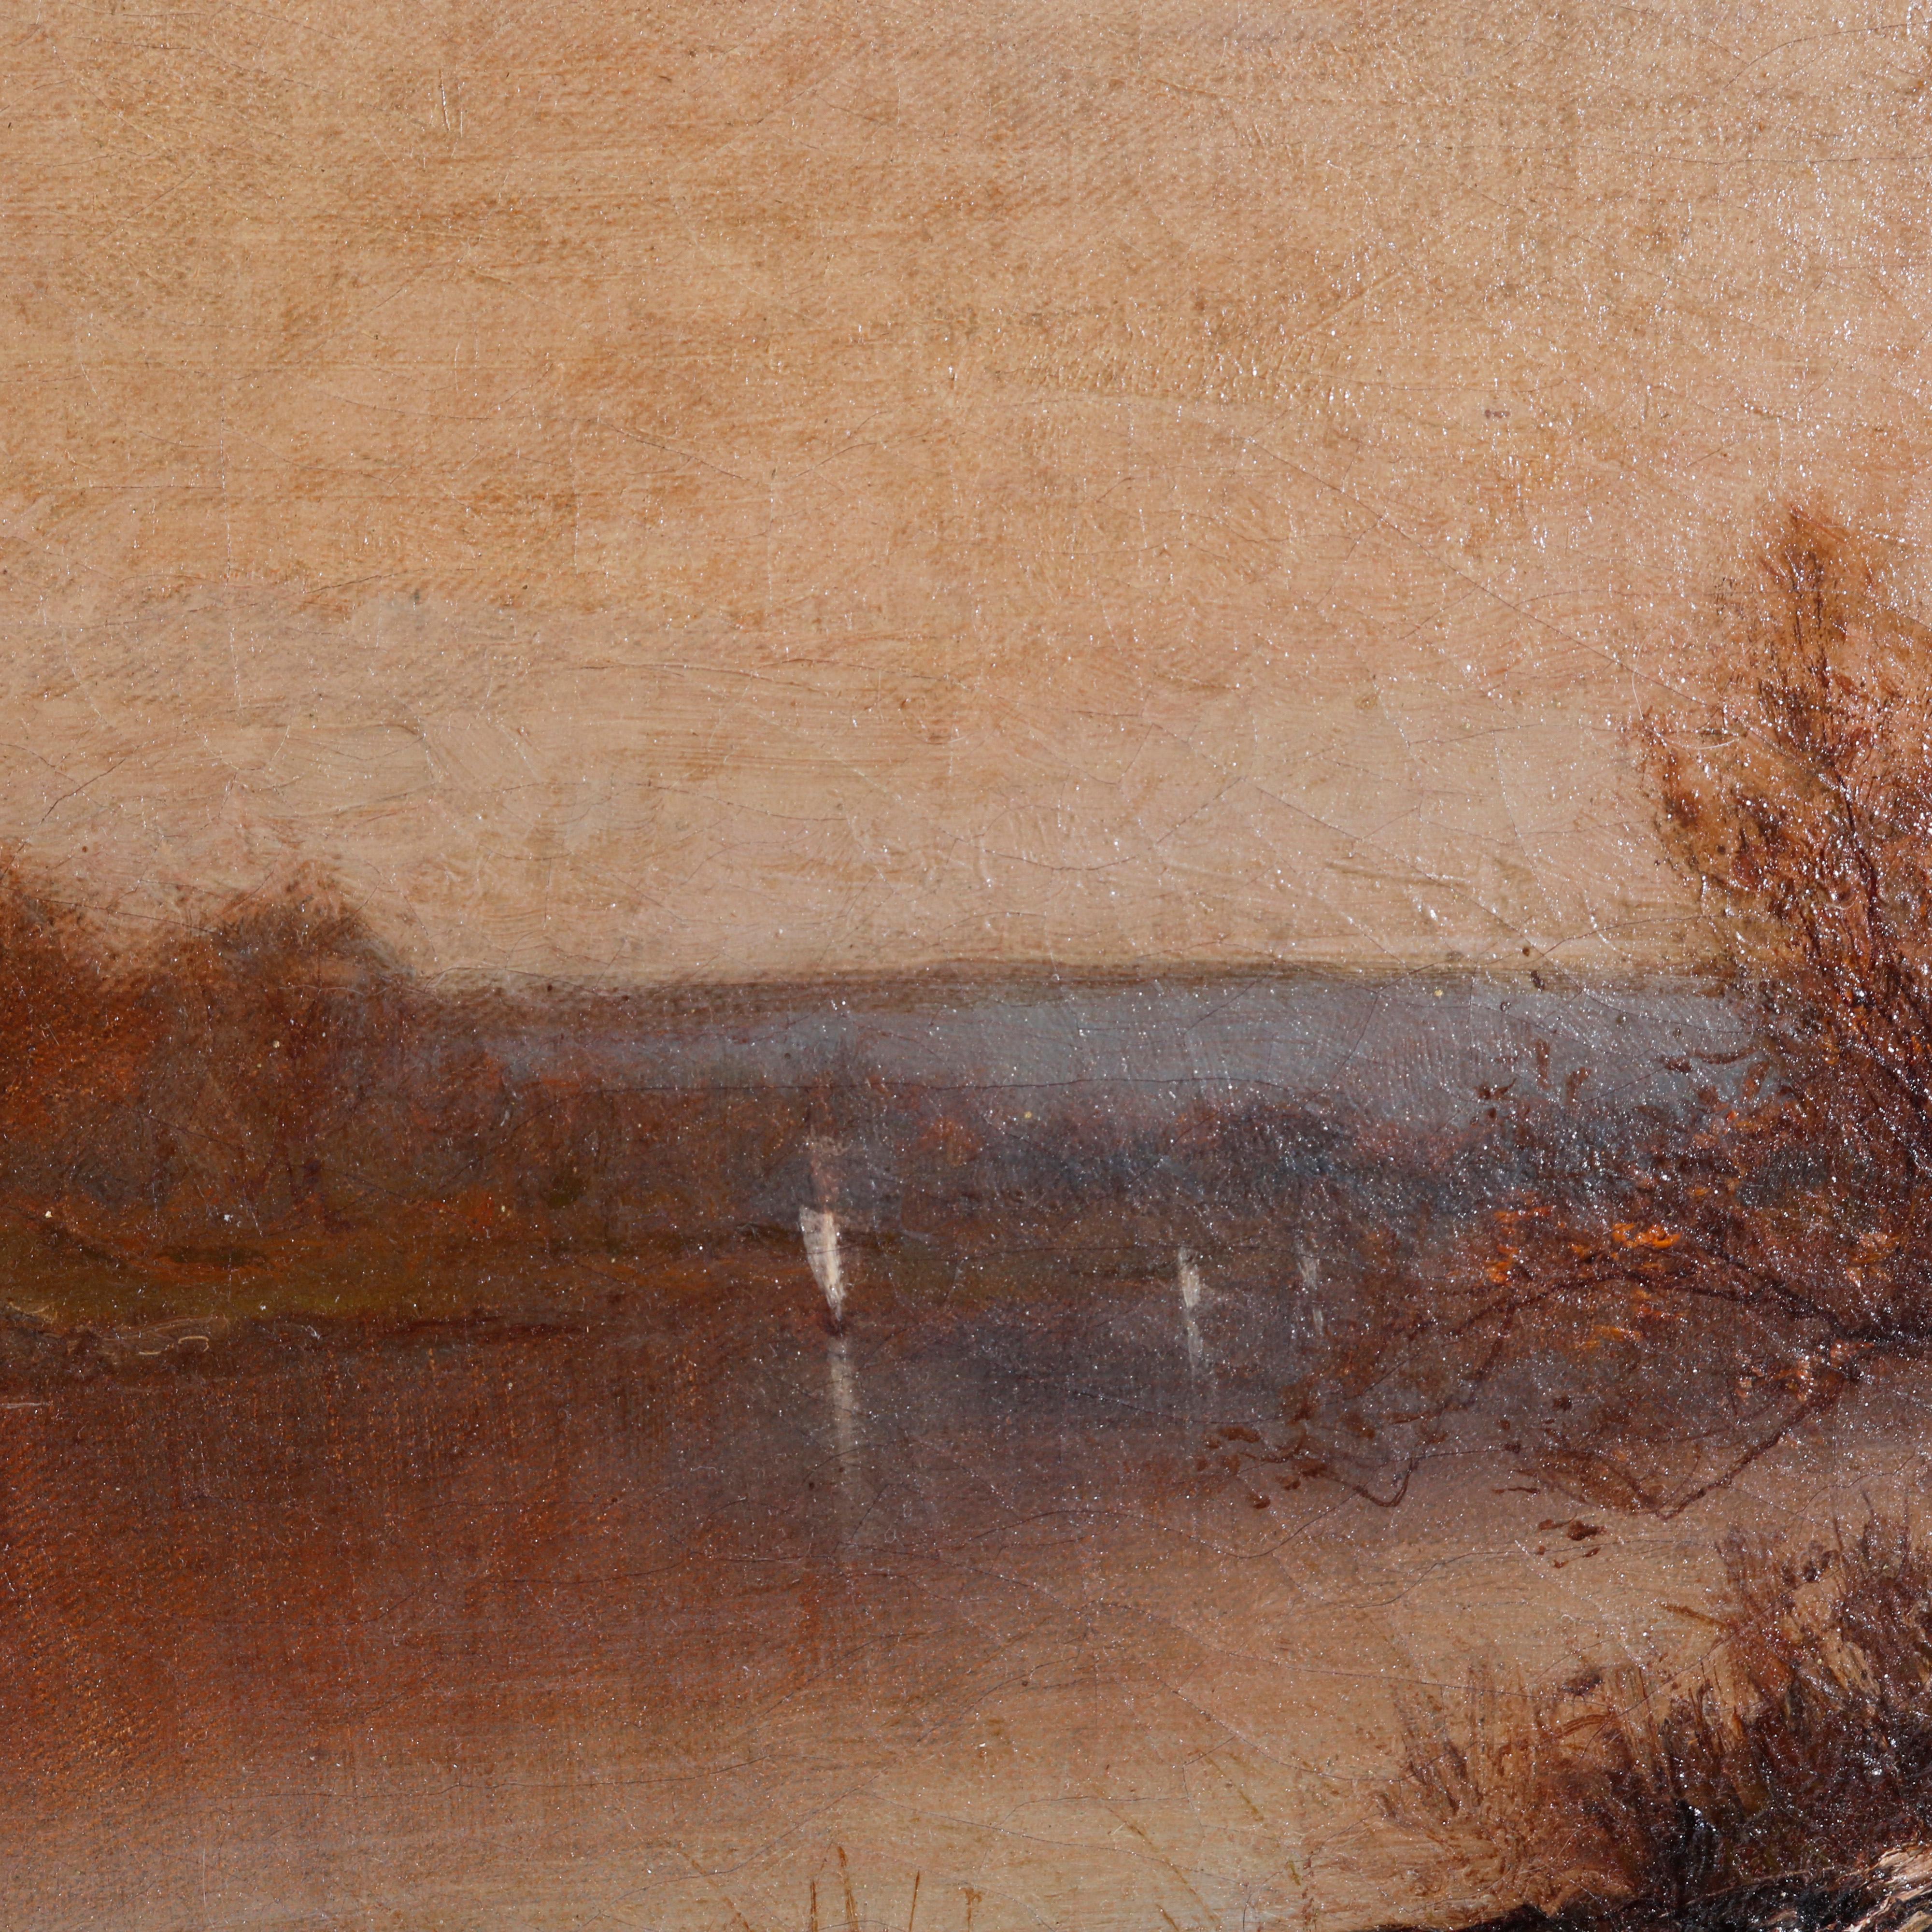 American Antique Landscape Painting, Autumn on the Patomac River, Signed Max Weyl, 19thC